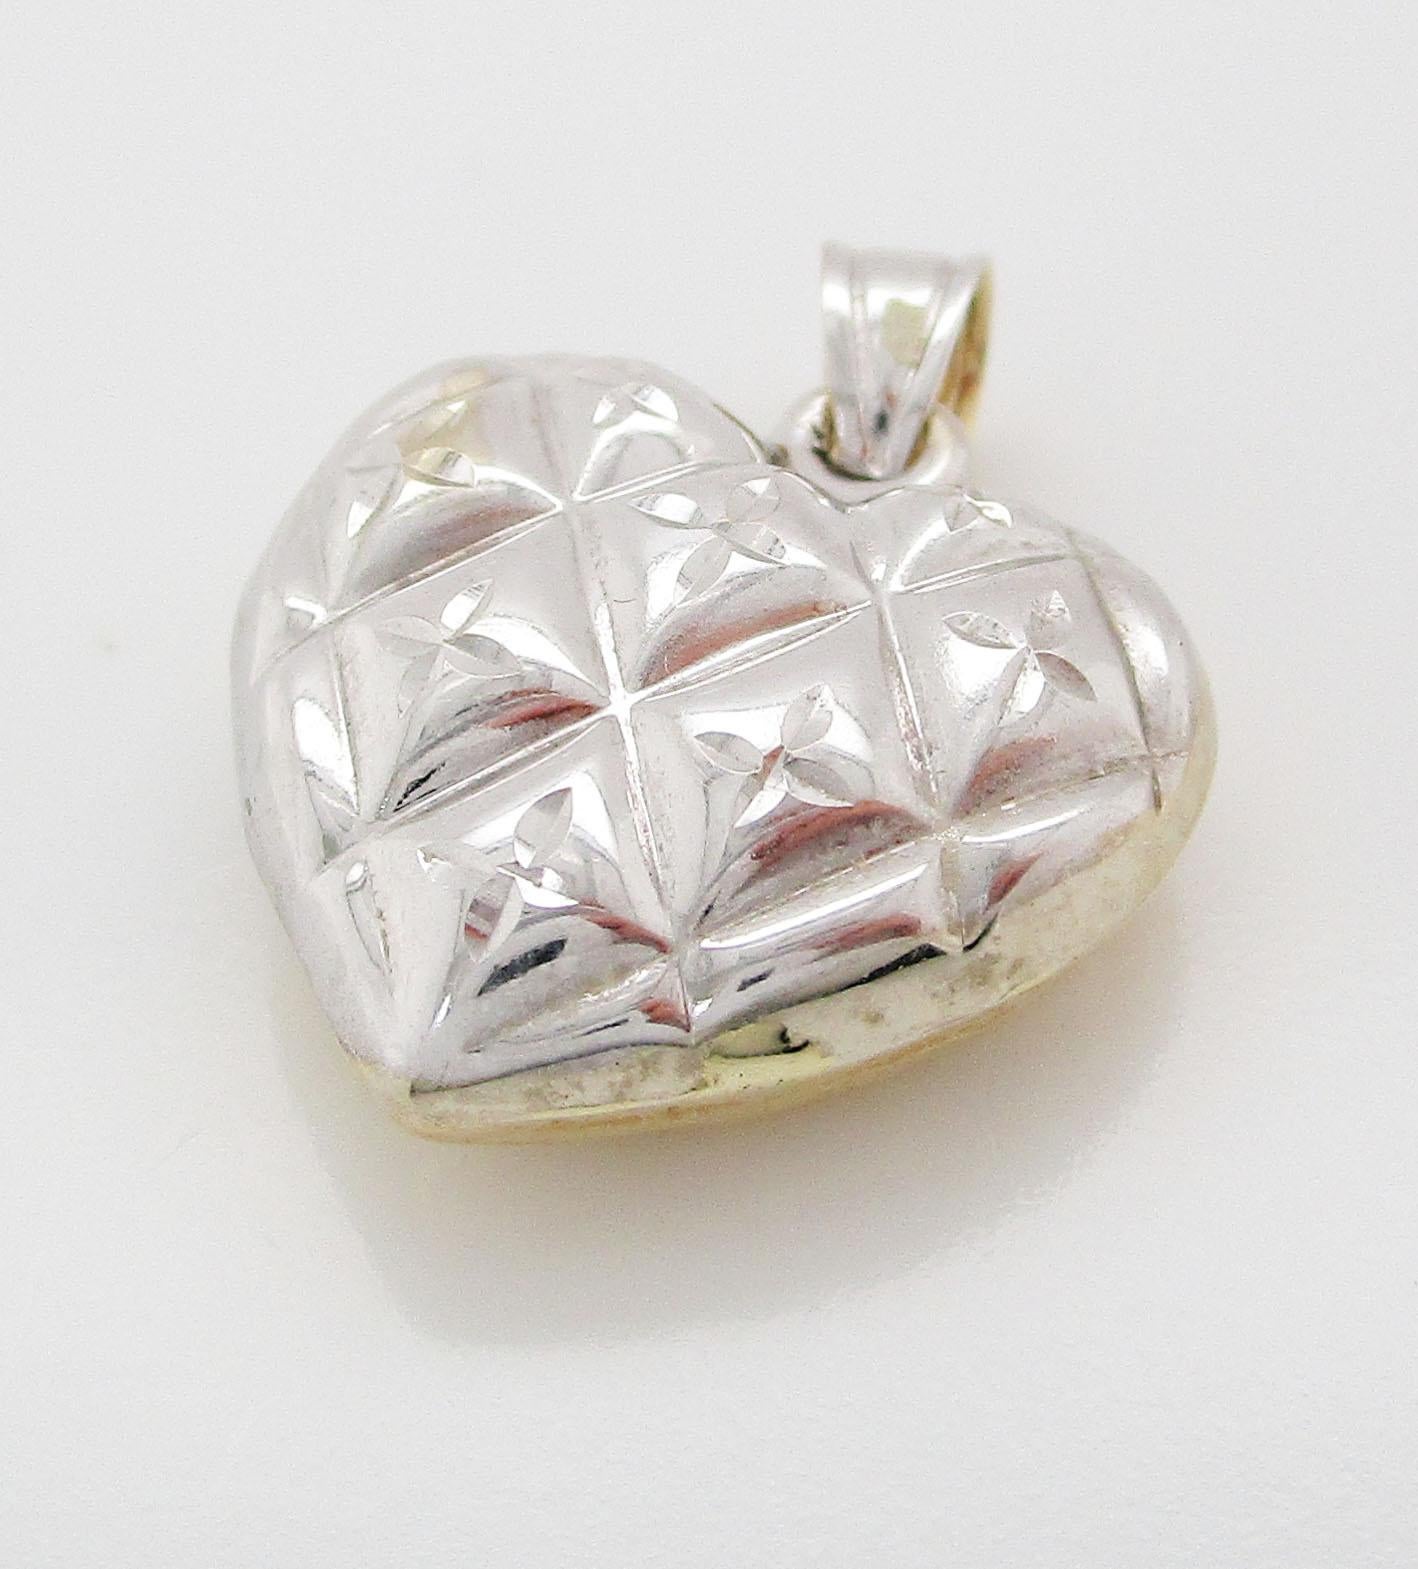 14 Karat Yellow and White Gold 2 Sided Quilted Heart Charm Pendant In Excellent Condition For Sale In Lexington, KY